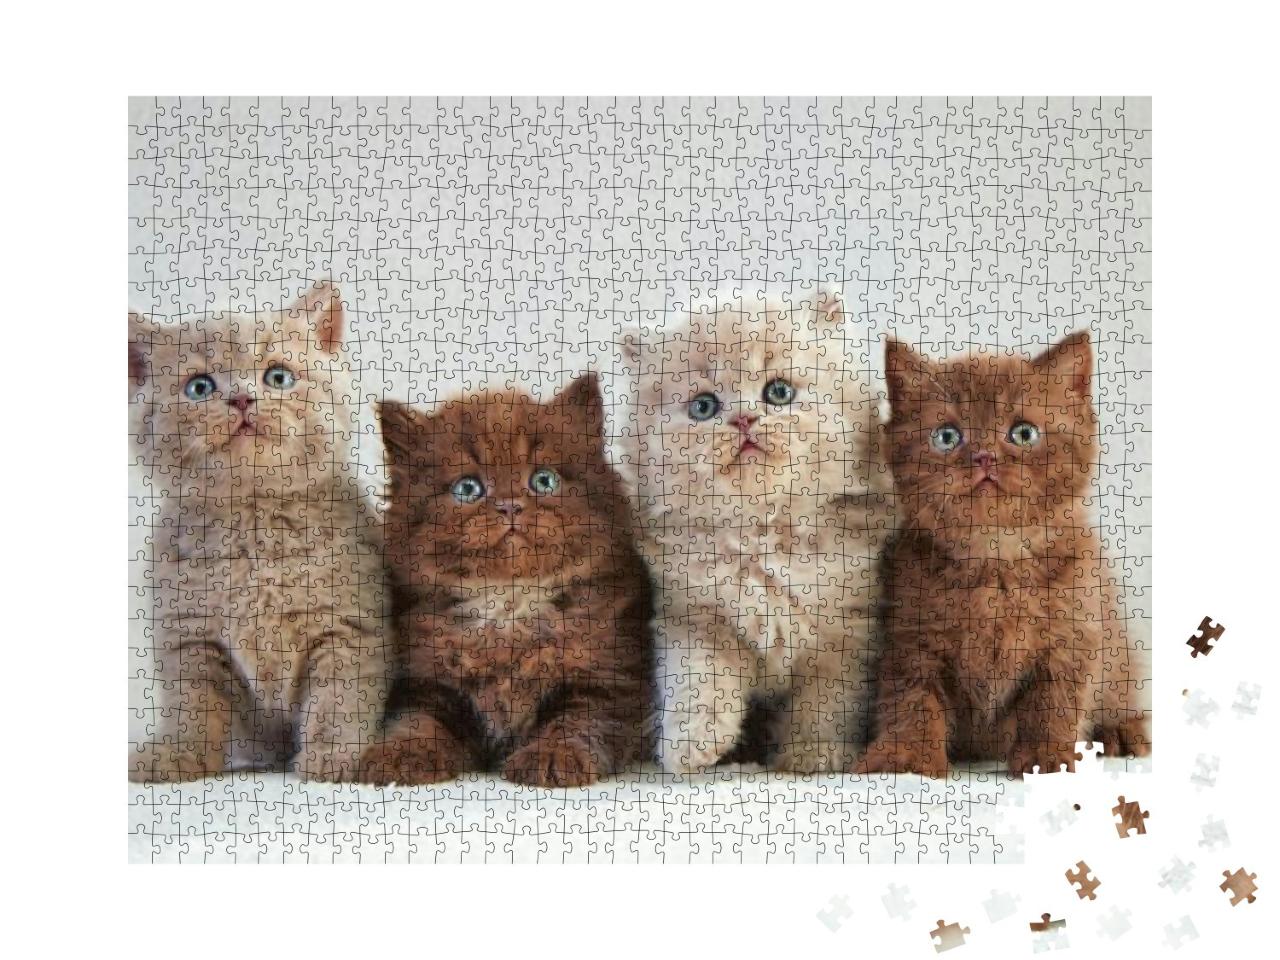 Four Various British Kittens Sitting on Beige Plaid... Jigsaw Puzzle with 1000 pieces